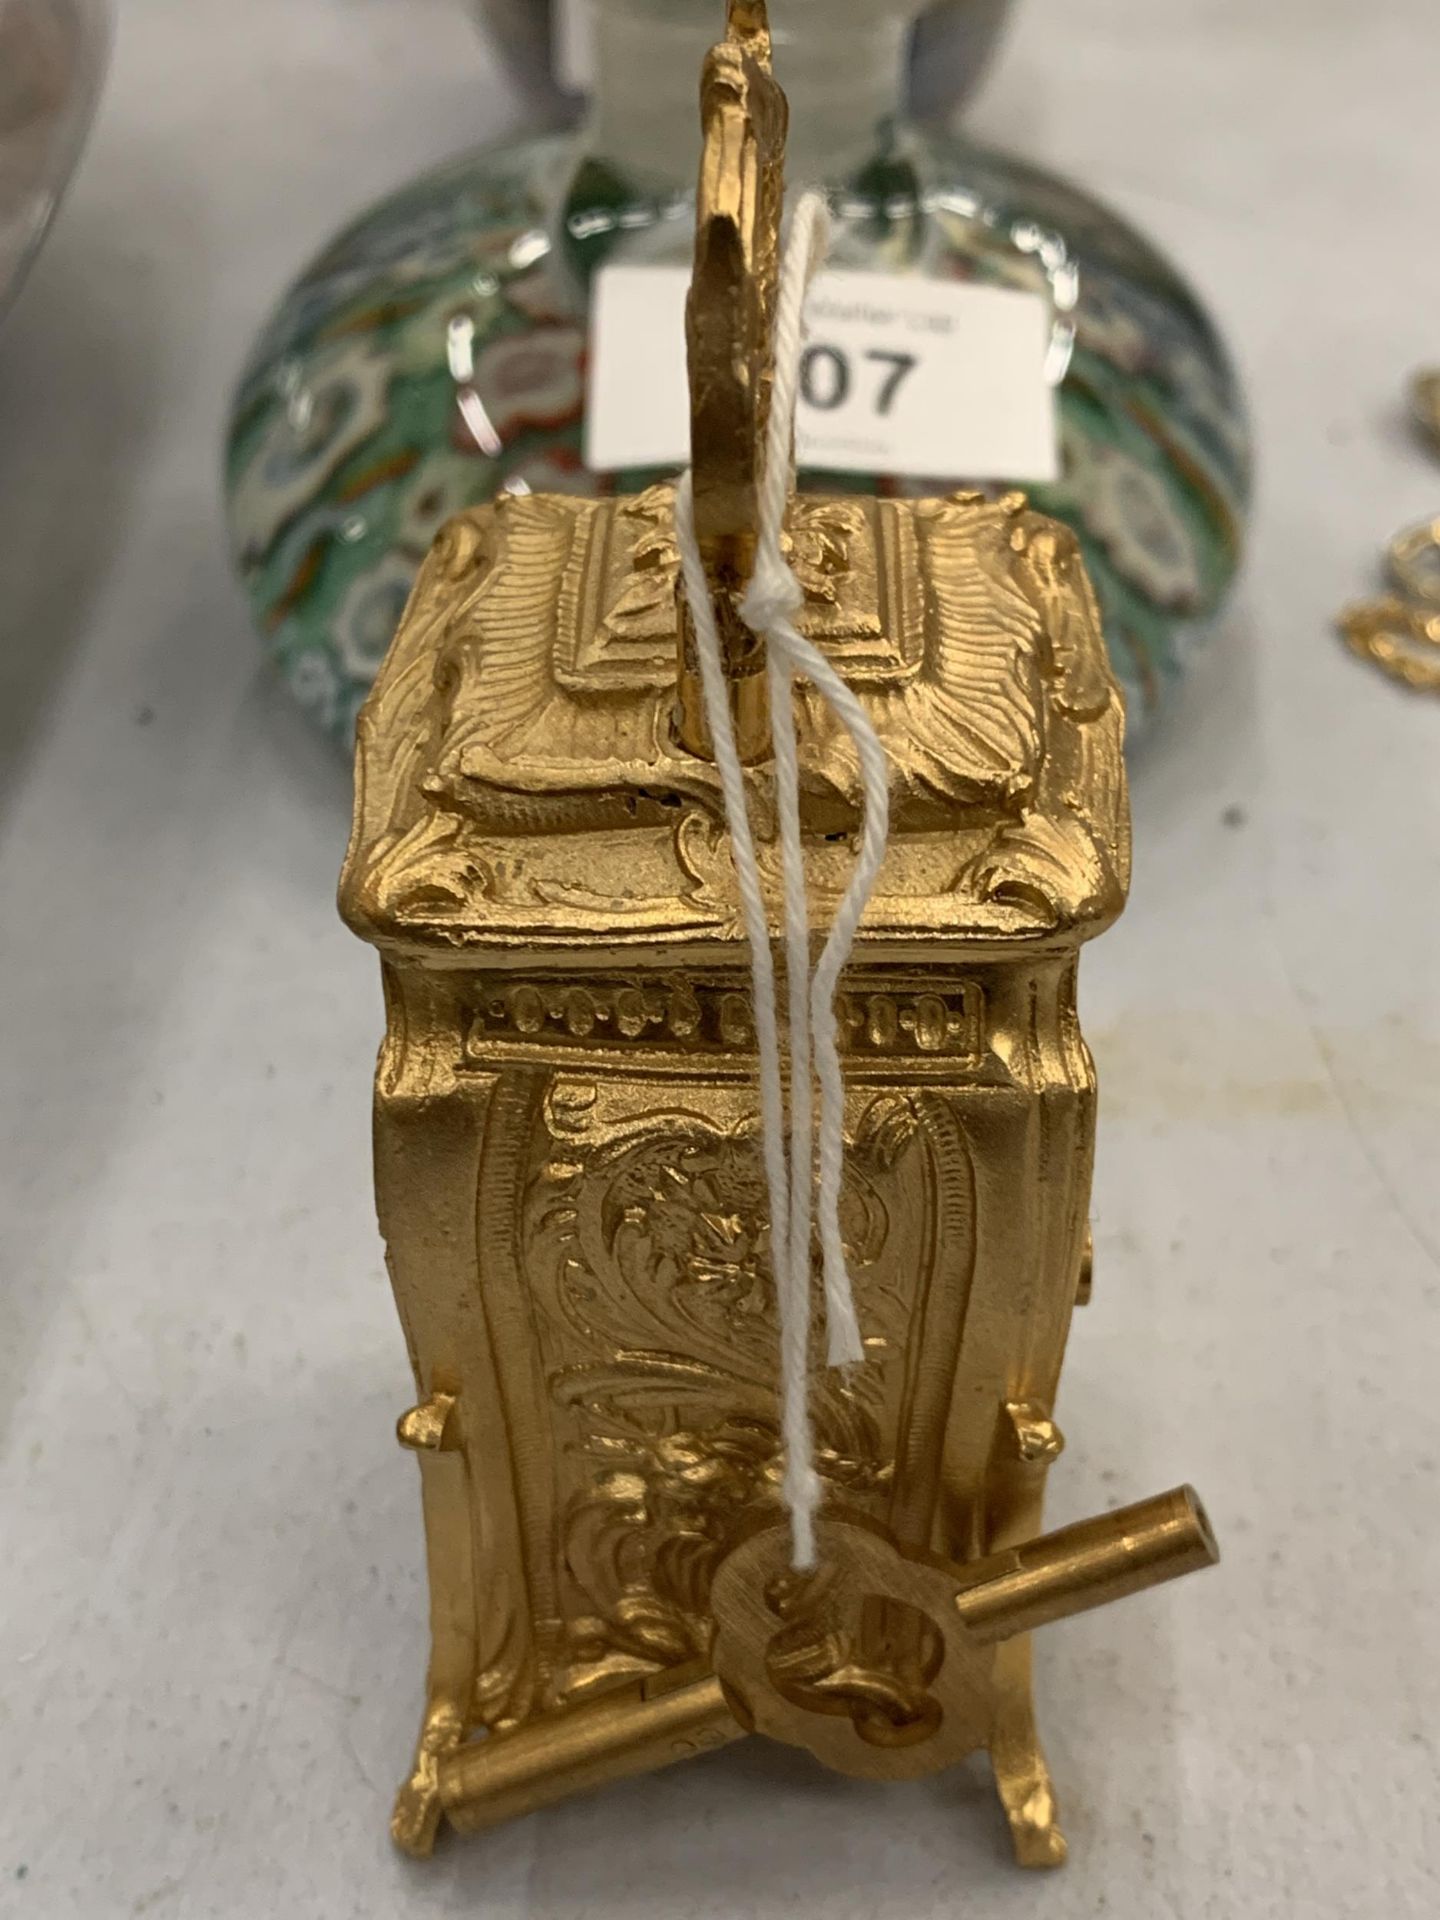 A MINIATURE GILDED FRENCH CLOCK WITH KEY HEIGHT 3.5" SEEN WORKING BUT NO WARRANTY - Image 2 of 3